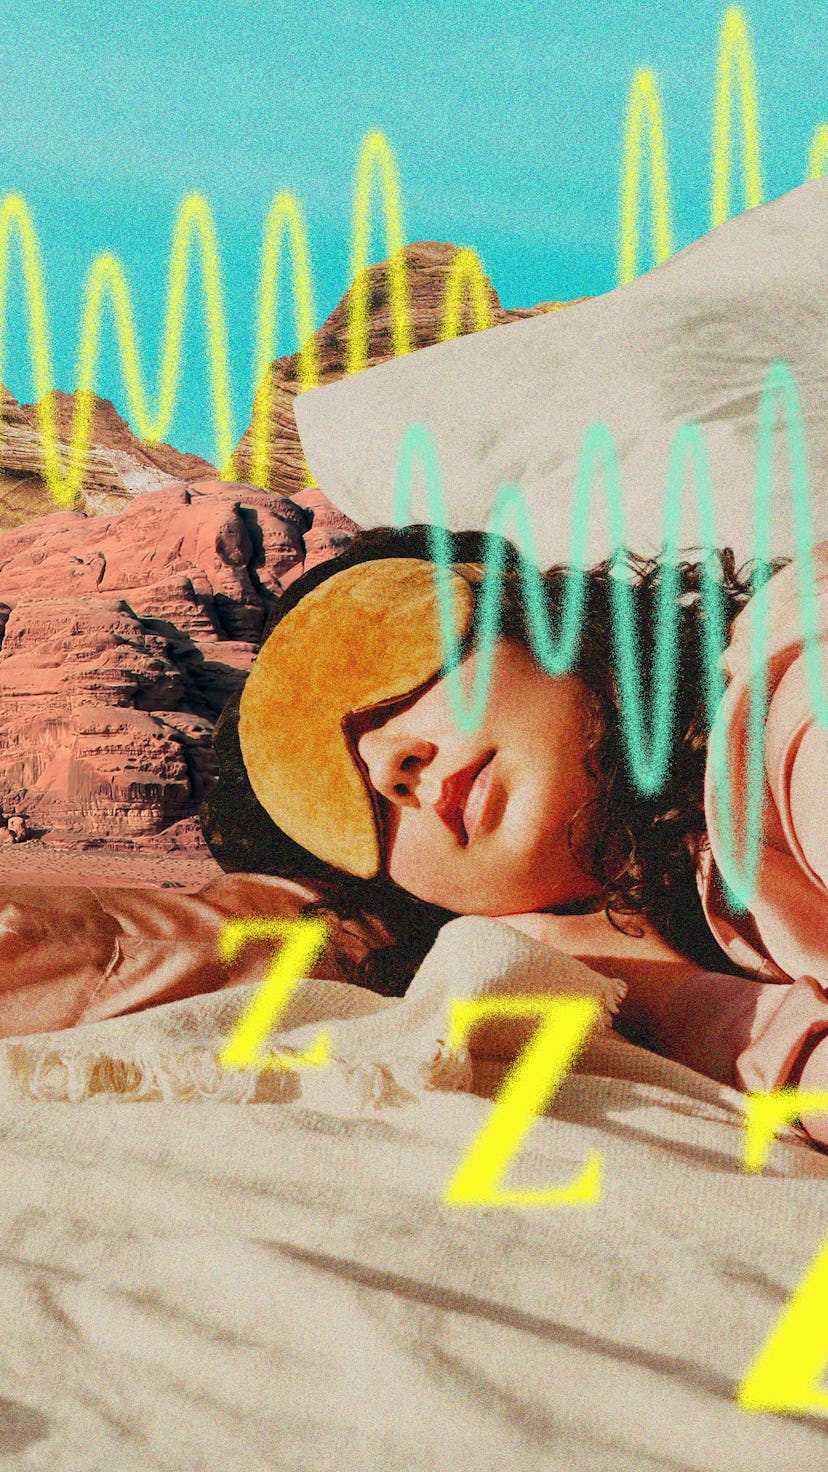 An abstract collage of a woman with a sleeping mask who sleeps wth background noise